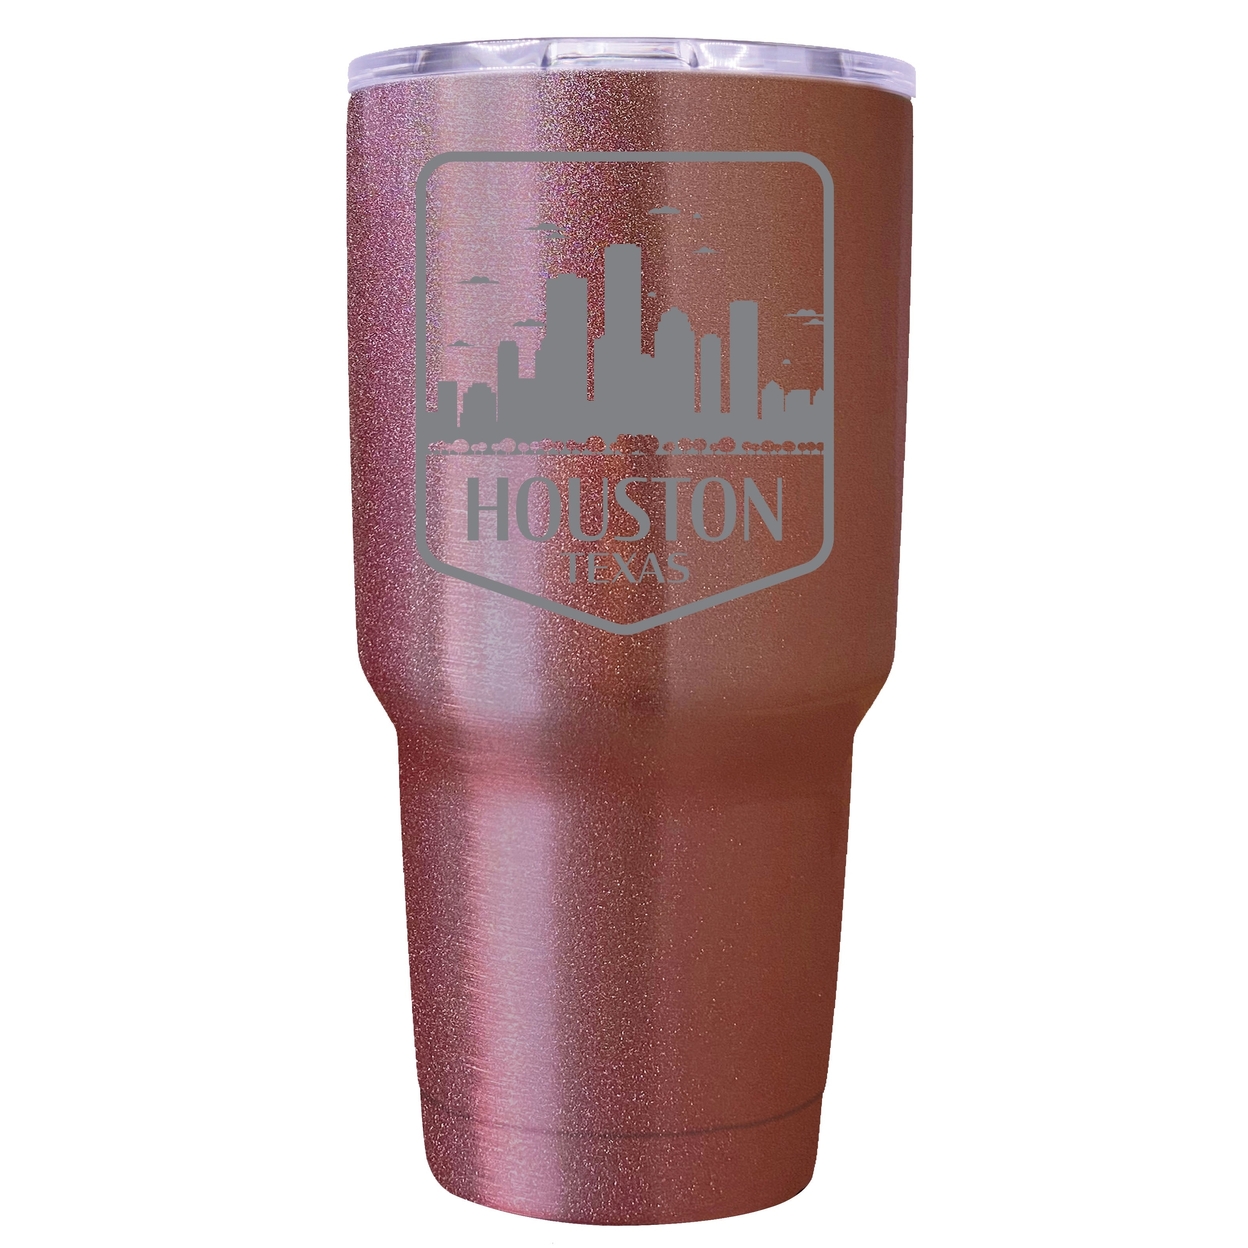 Houston Texas Souvenir 24 Oz Engraved Insulated Stainless Steel Tumbler - Rose Gold,,4-Pack